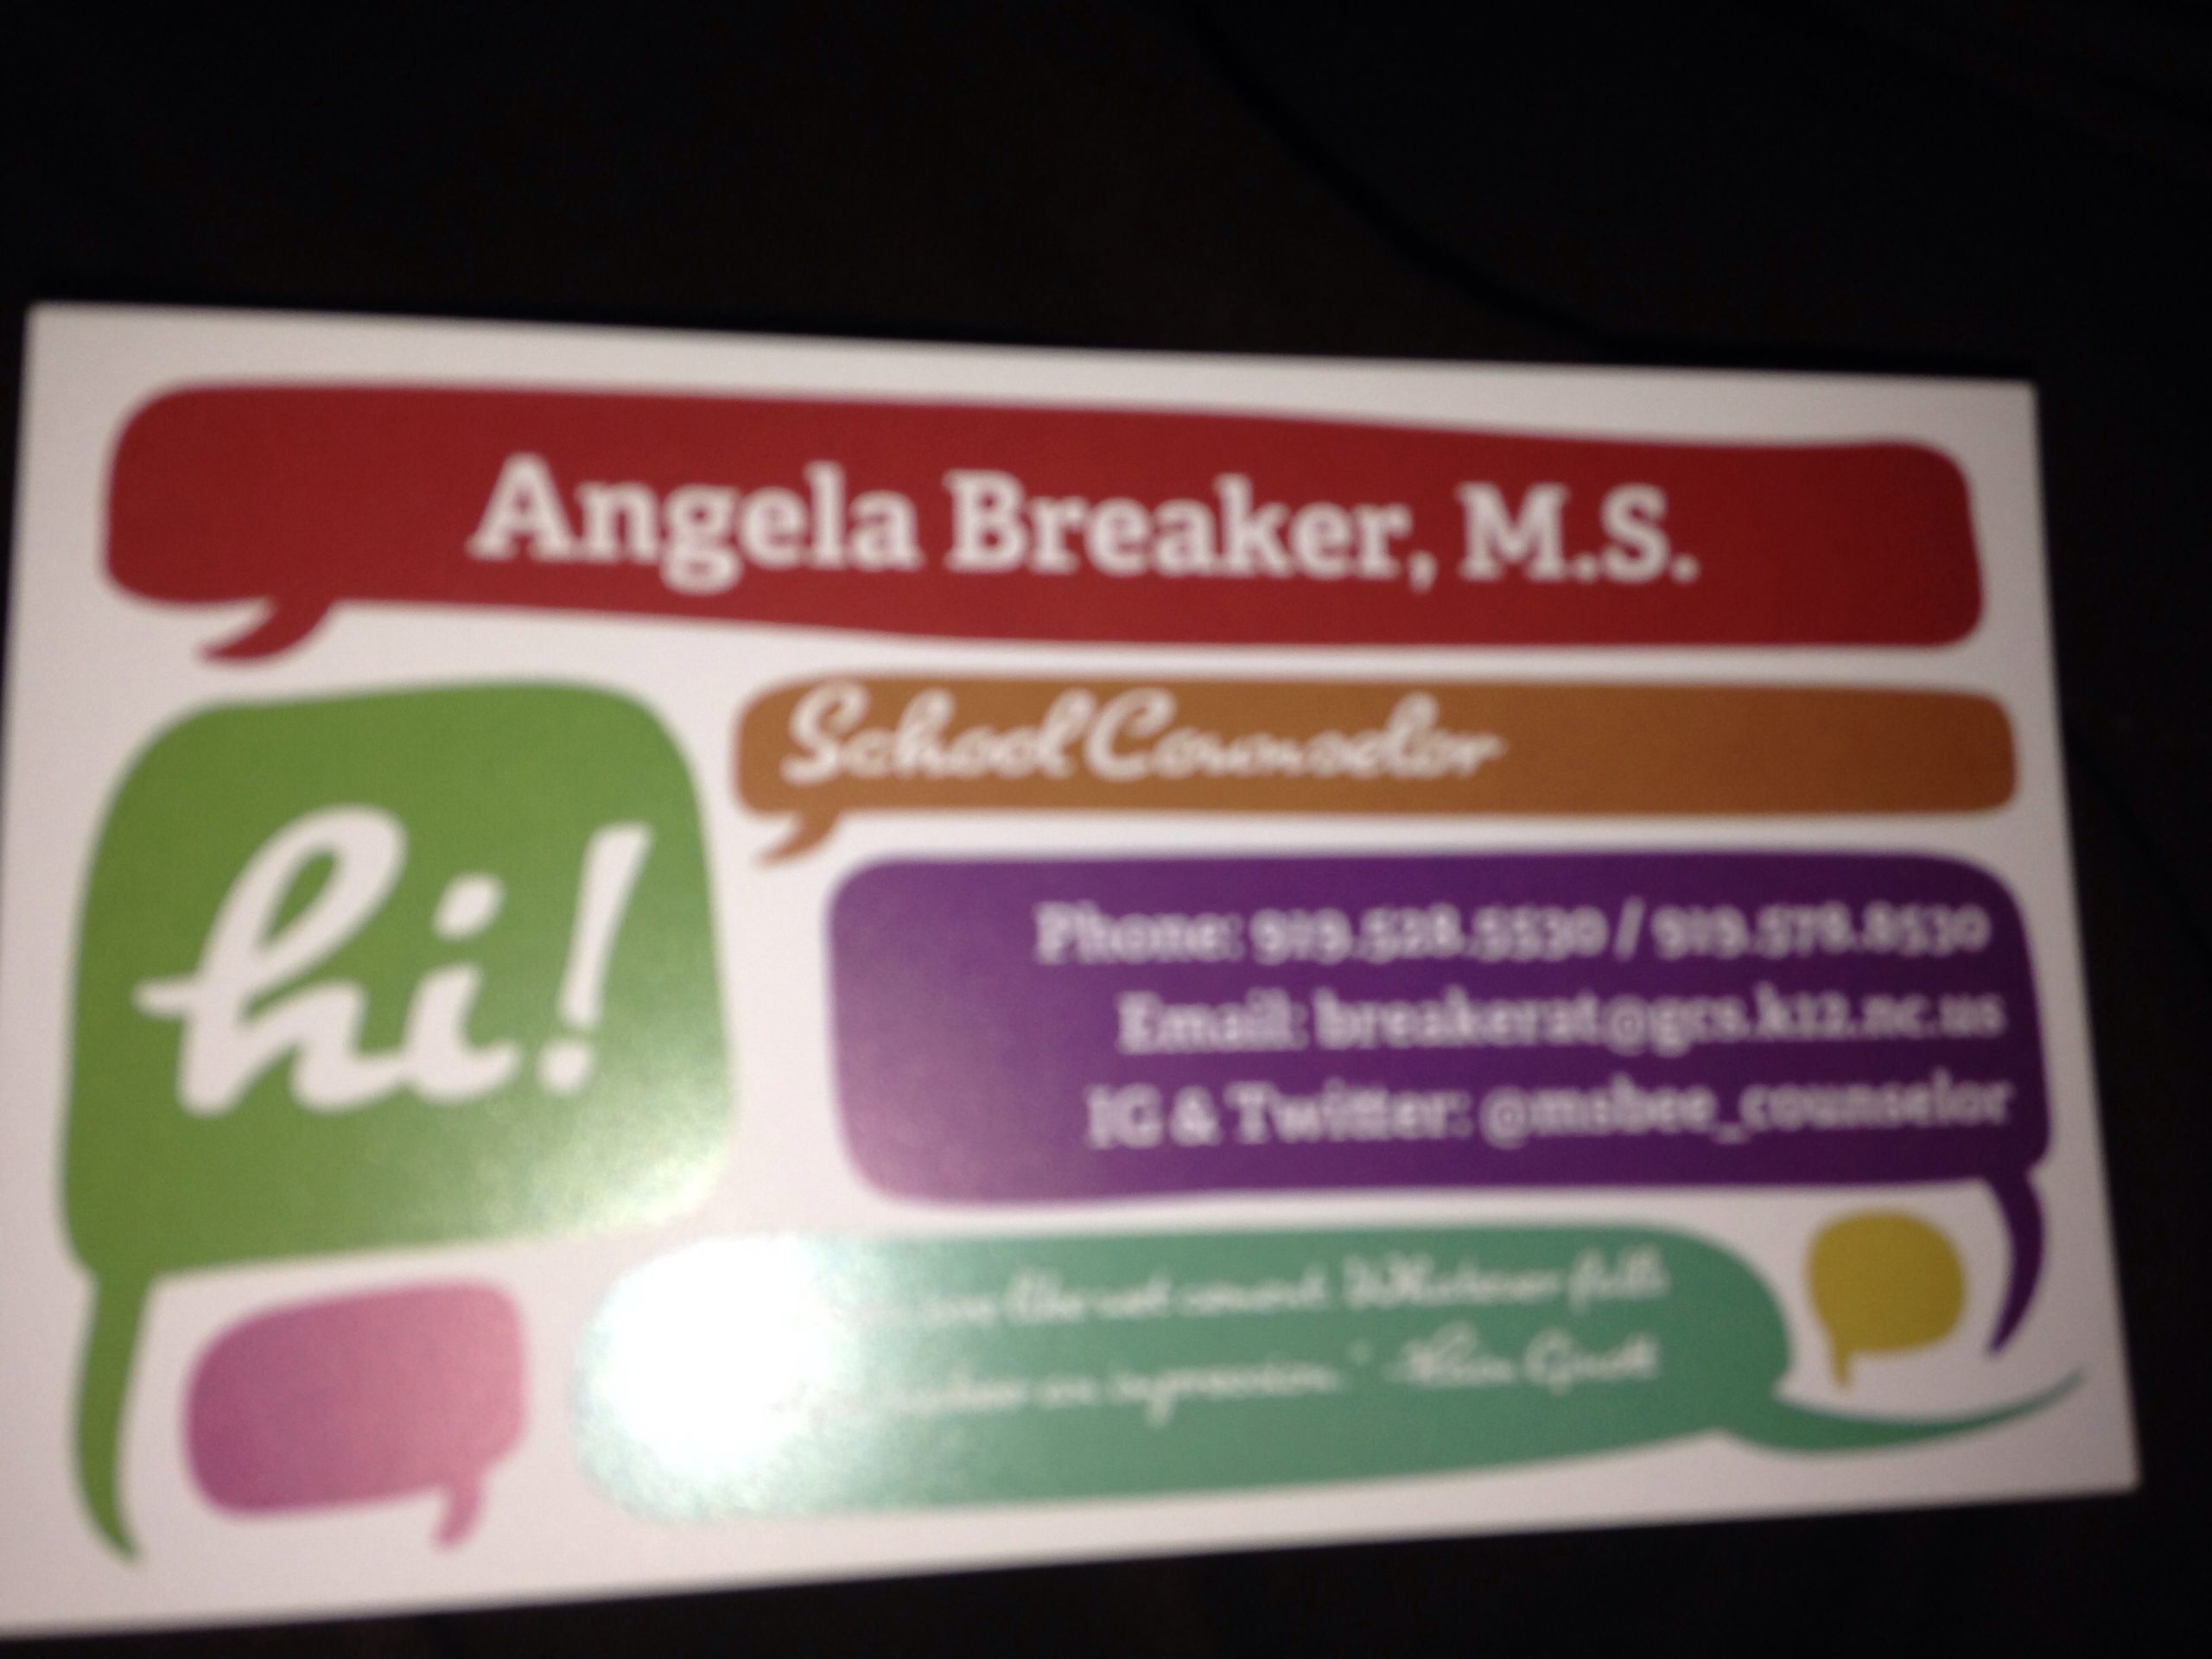 school counselor business cards 1